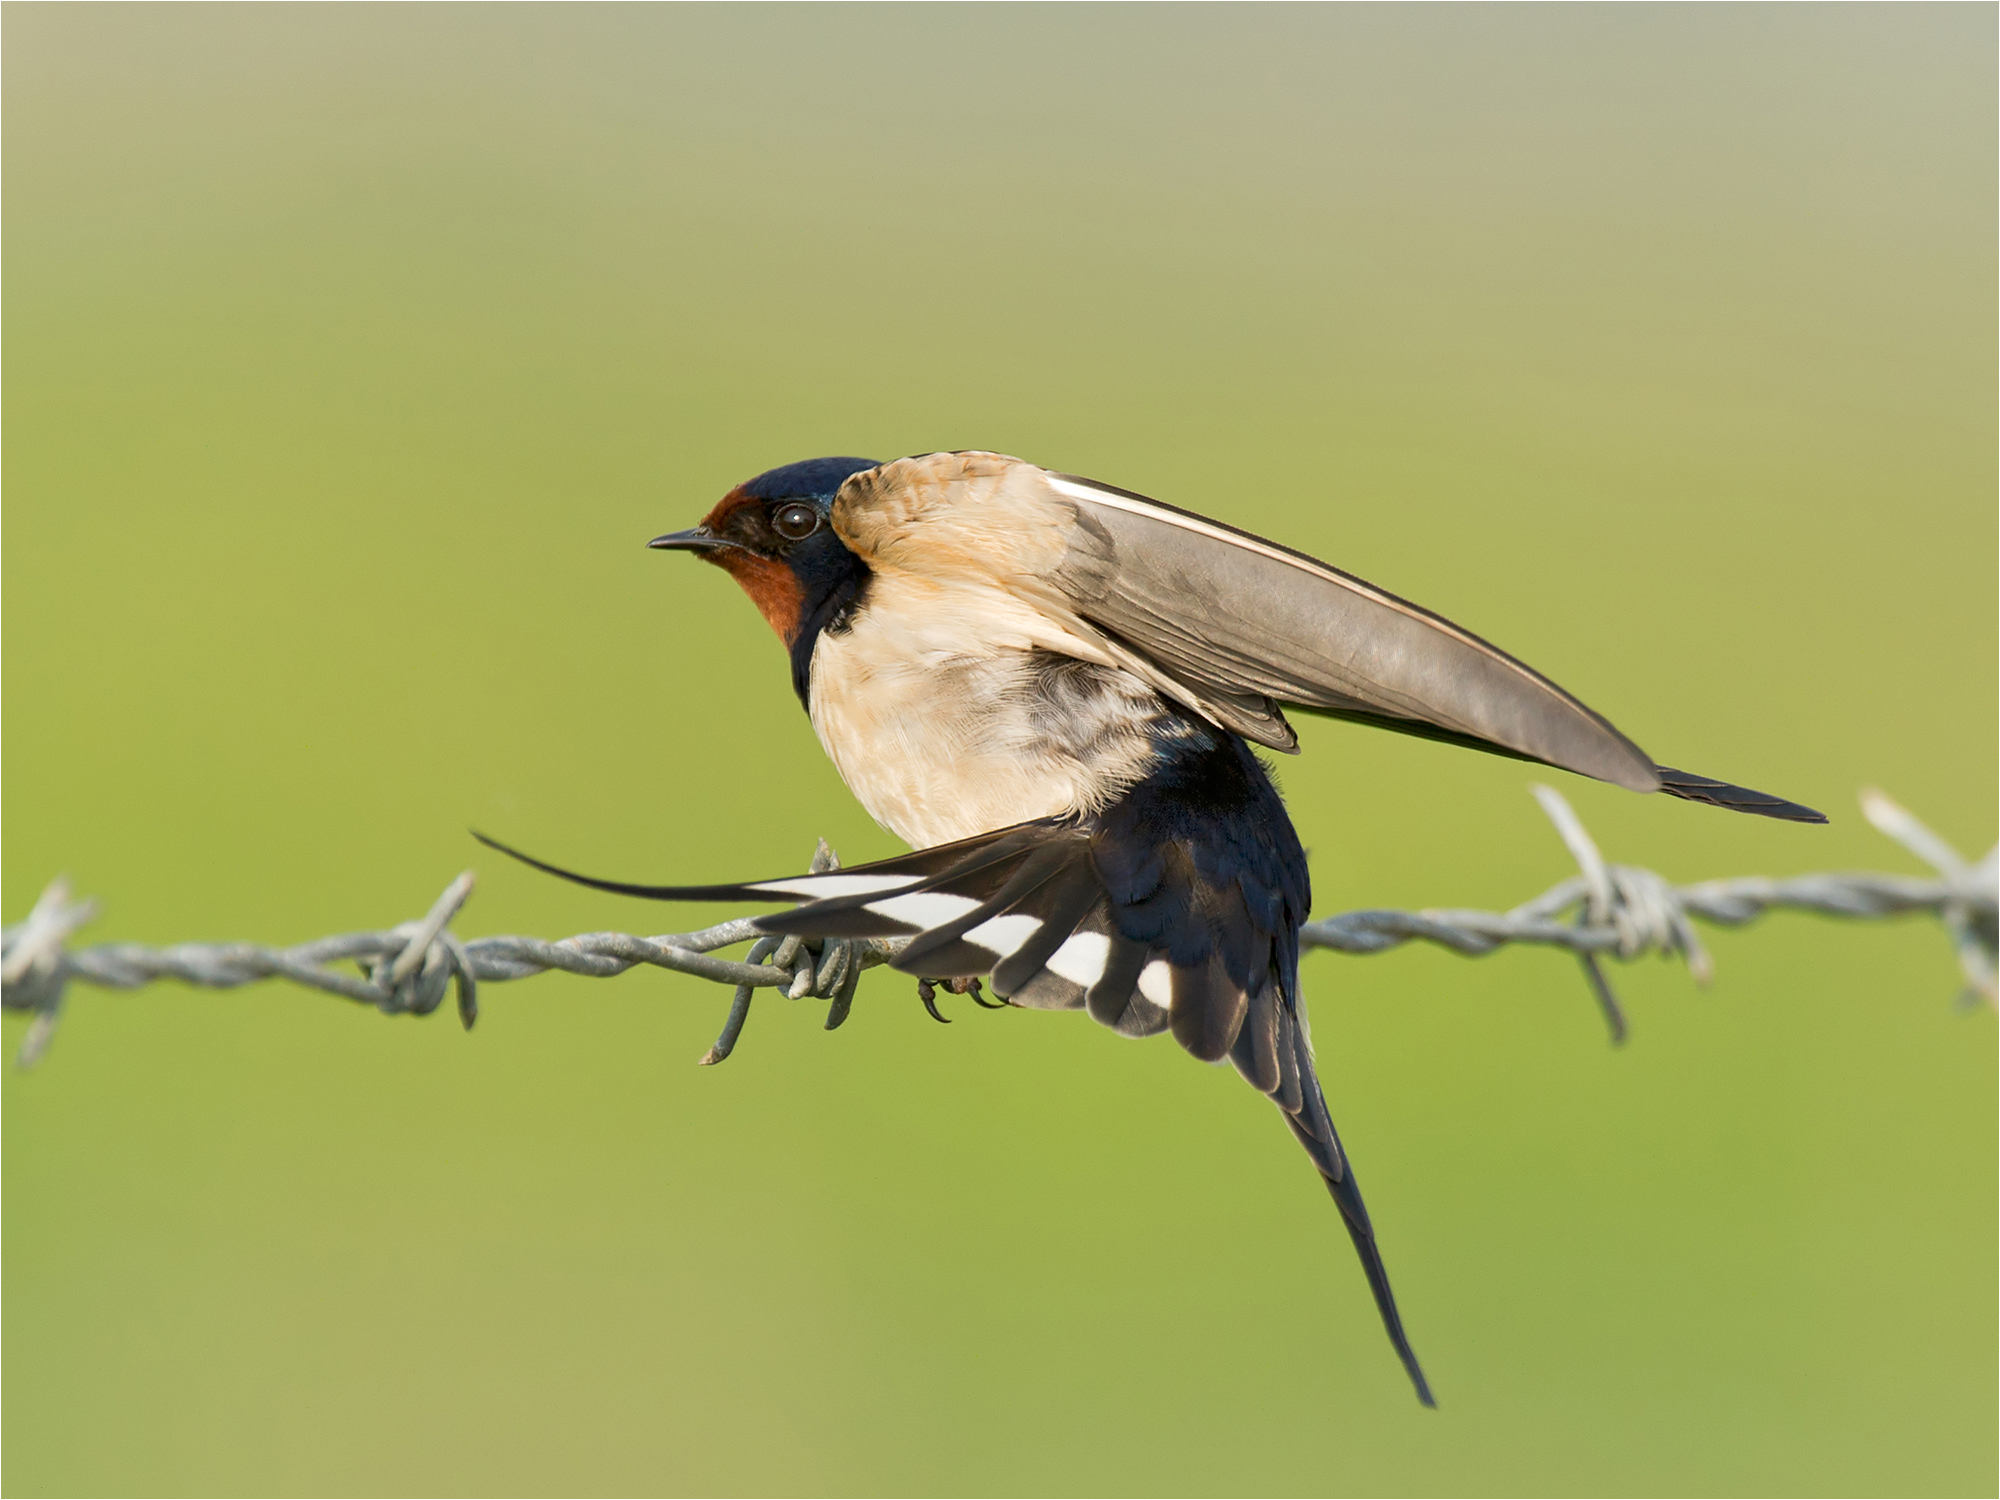 Swallow Wing Stretching